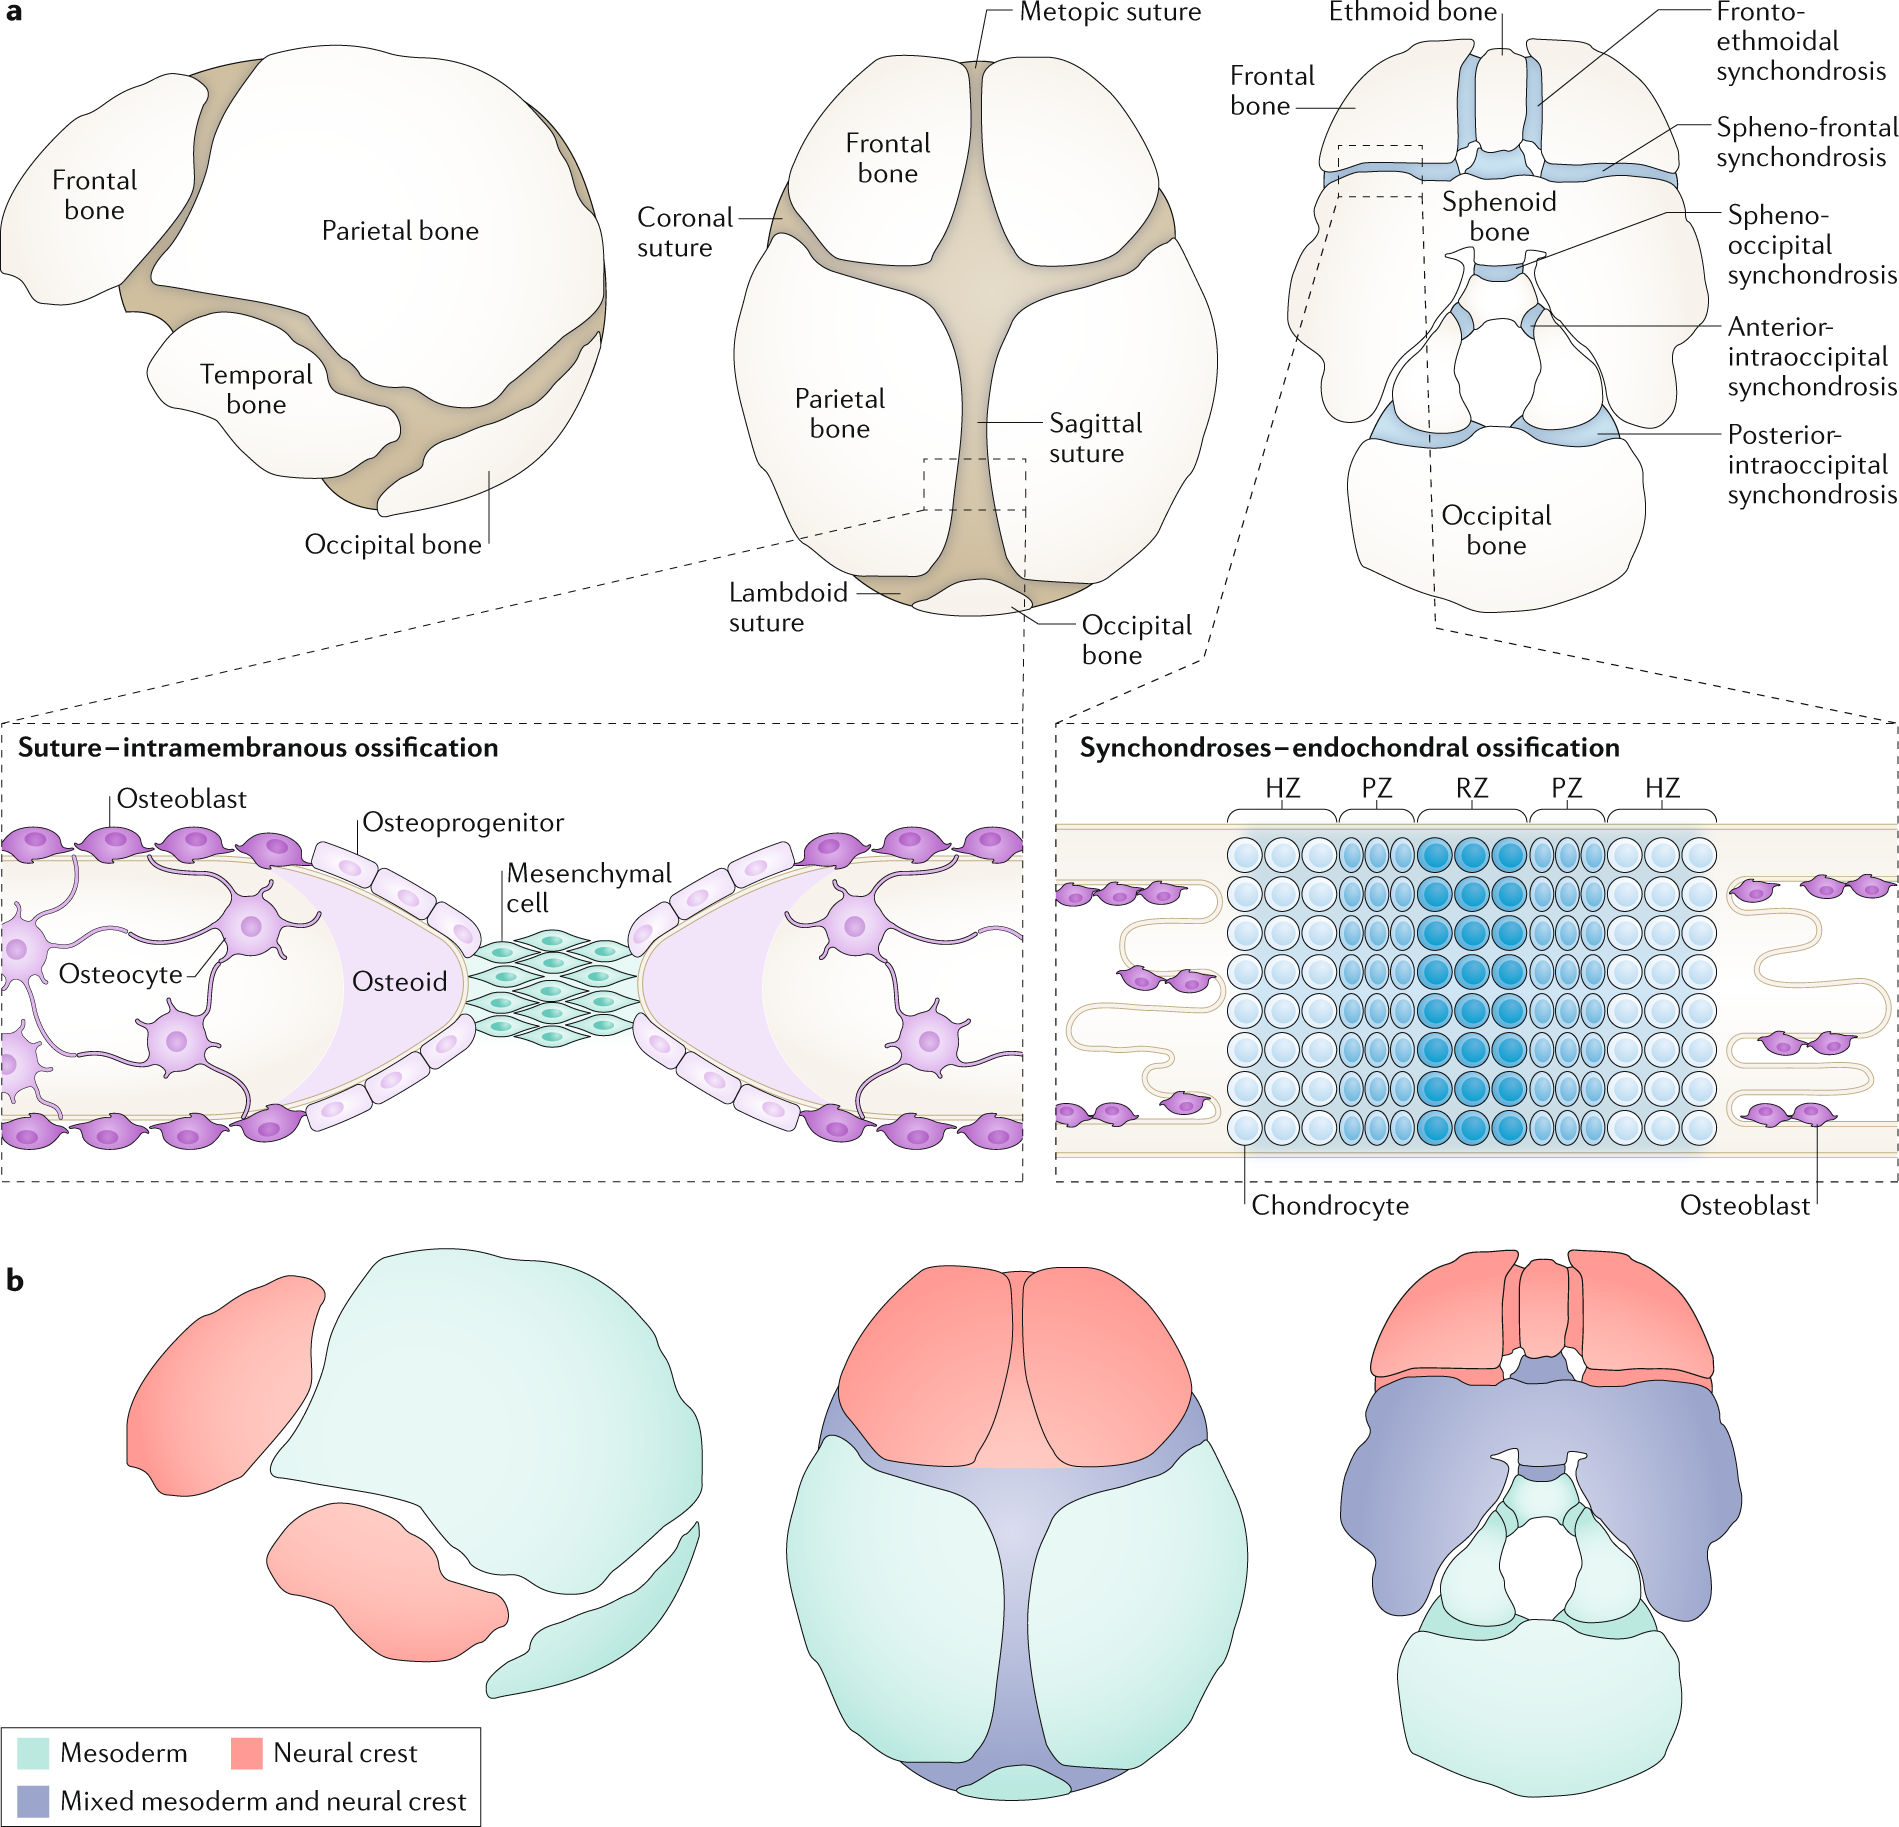 Role of thyroid hormones in craniofacial development | Nature Reviews  Endocrinology